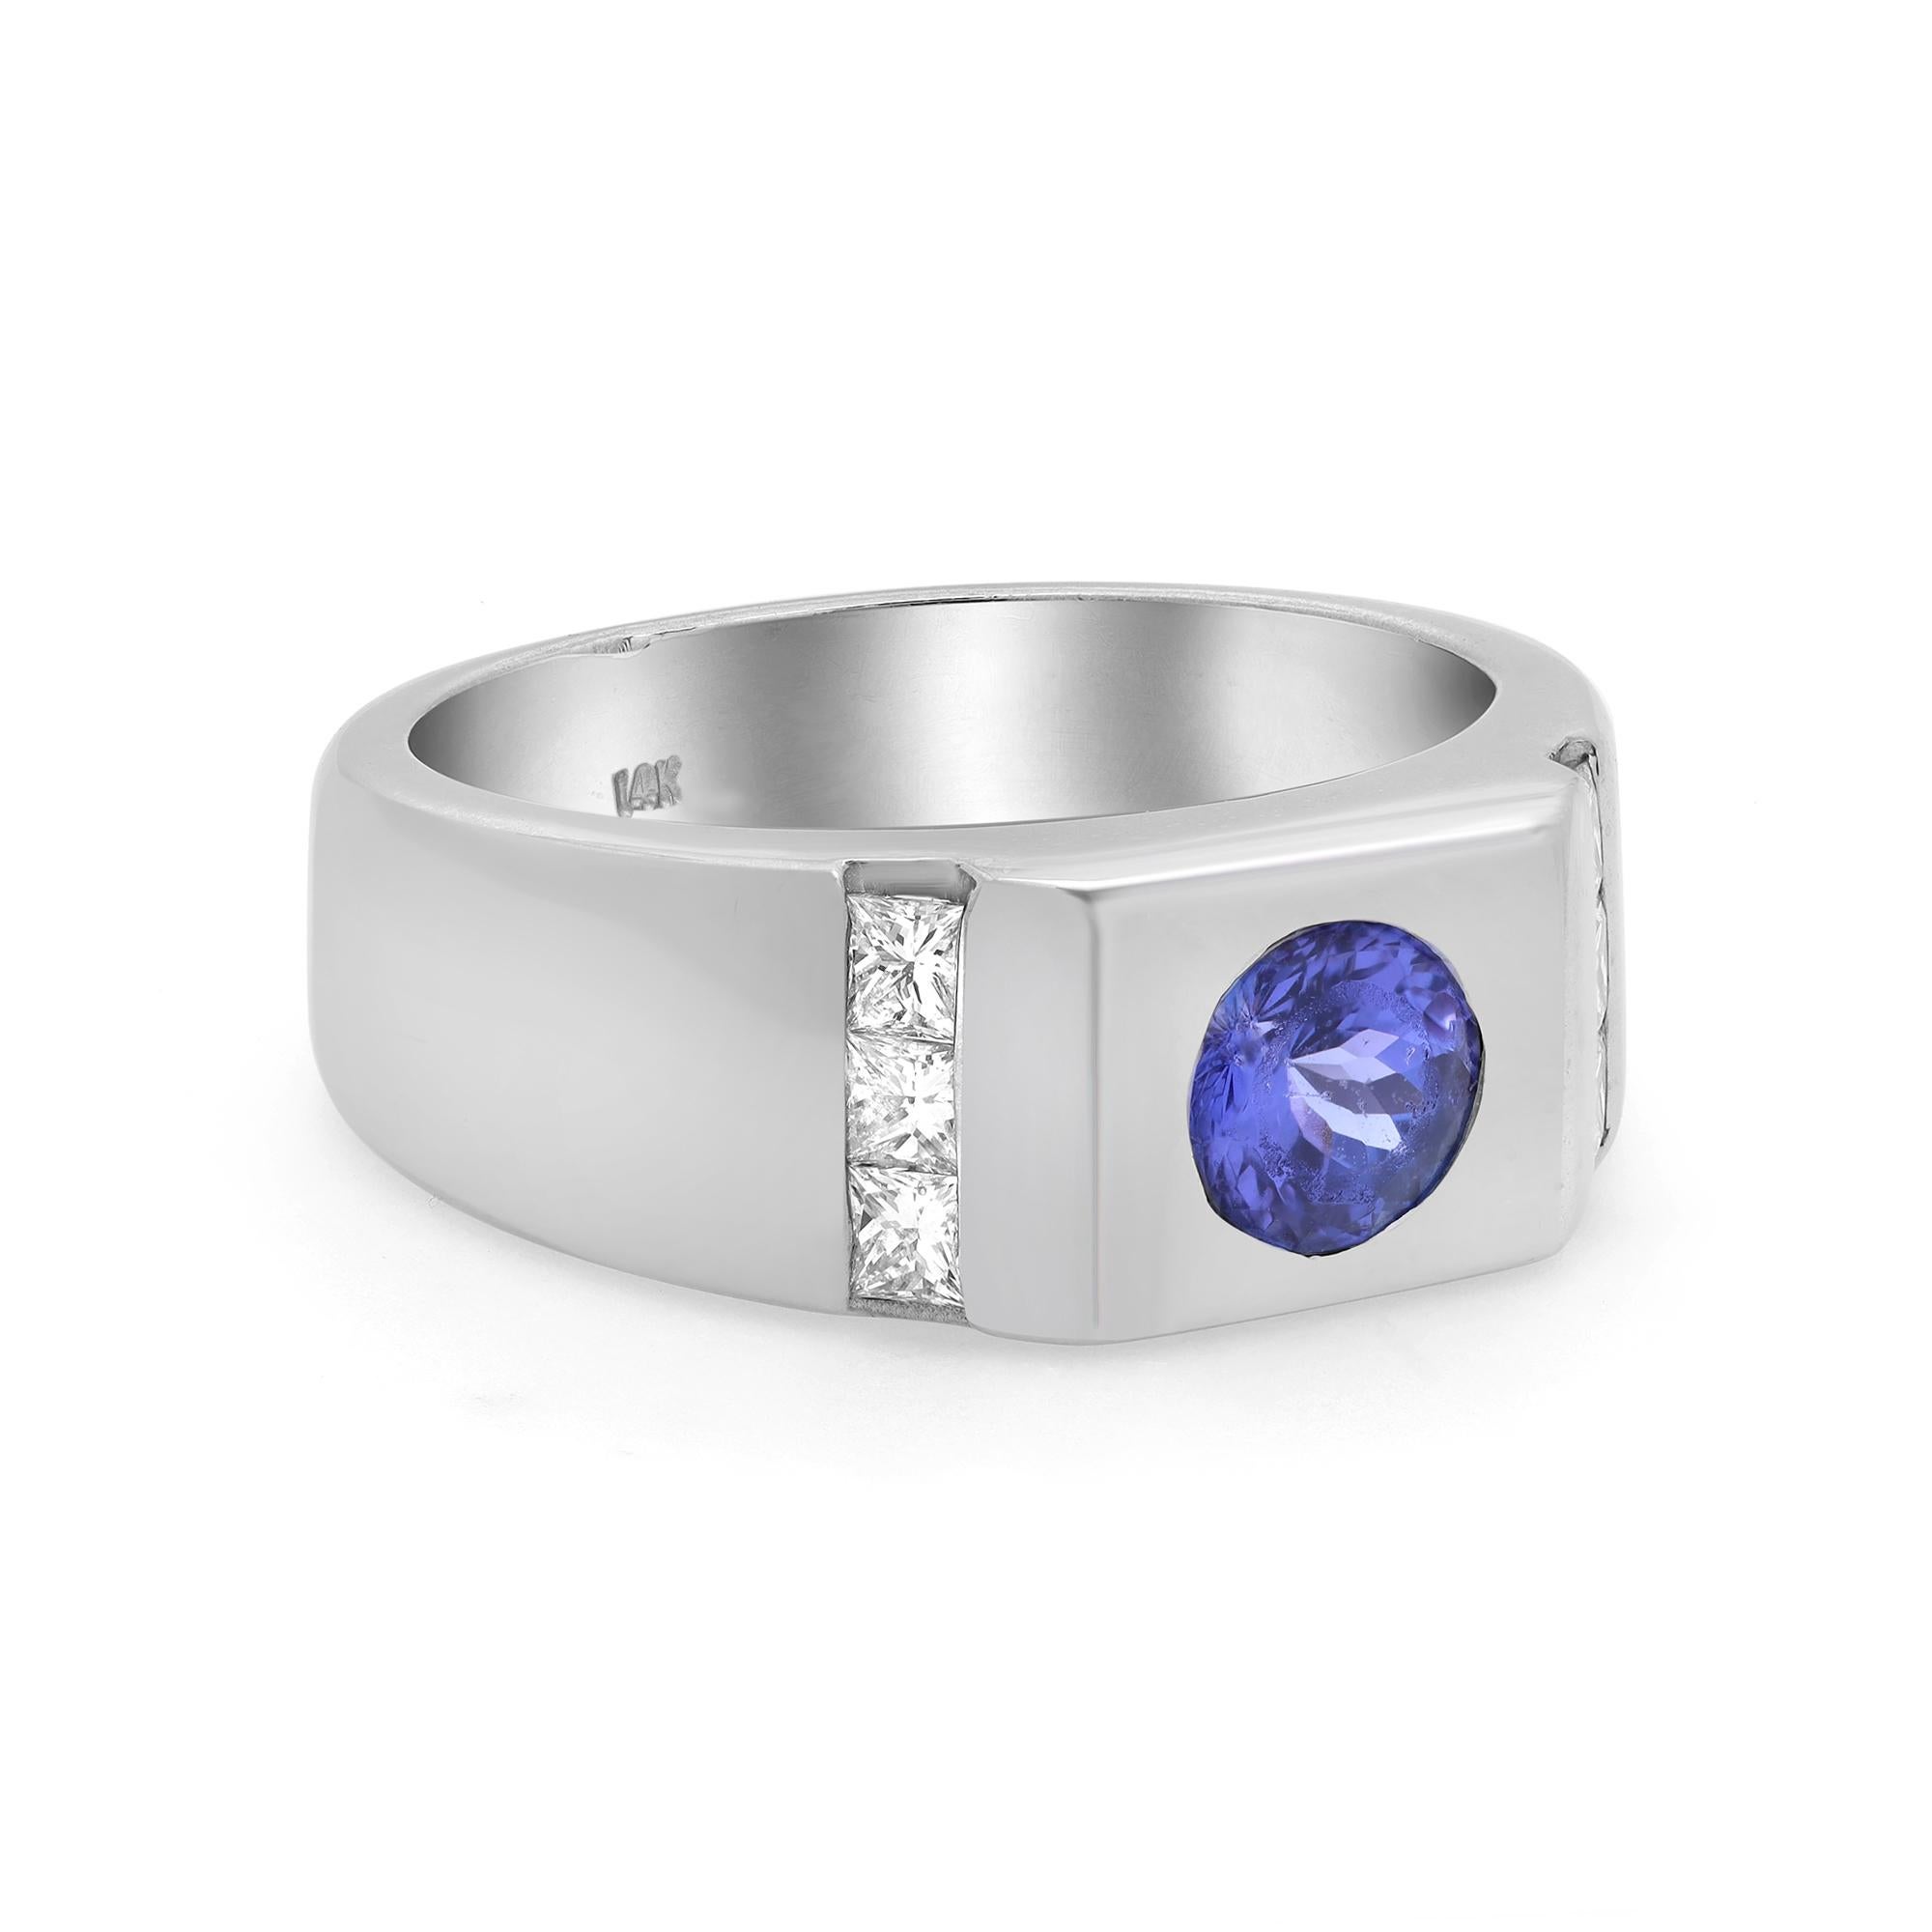 This stunning men's ring is crafted in 14K white gold and features a center stone: round cut Tanzanite weighing 0.85 carat with accents stones: 6 princess cut white diamonds weighing 0.50 carat. Ring size: 10.5. Band width: 9.33 mm. Total weight: